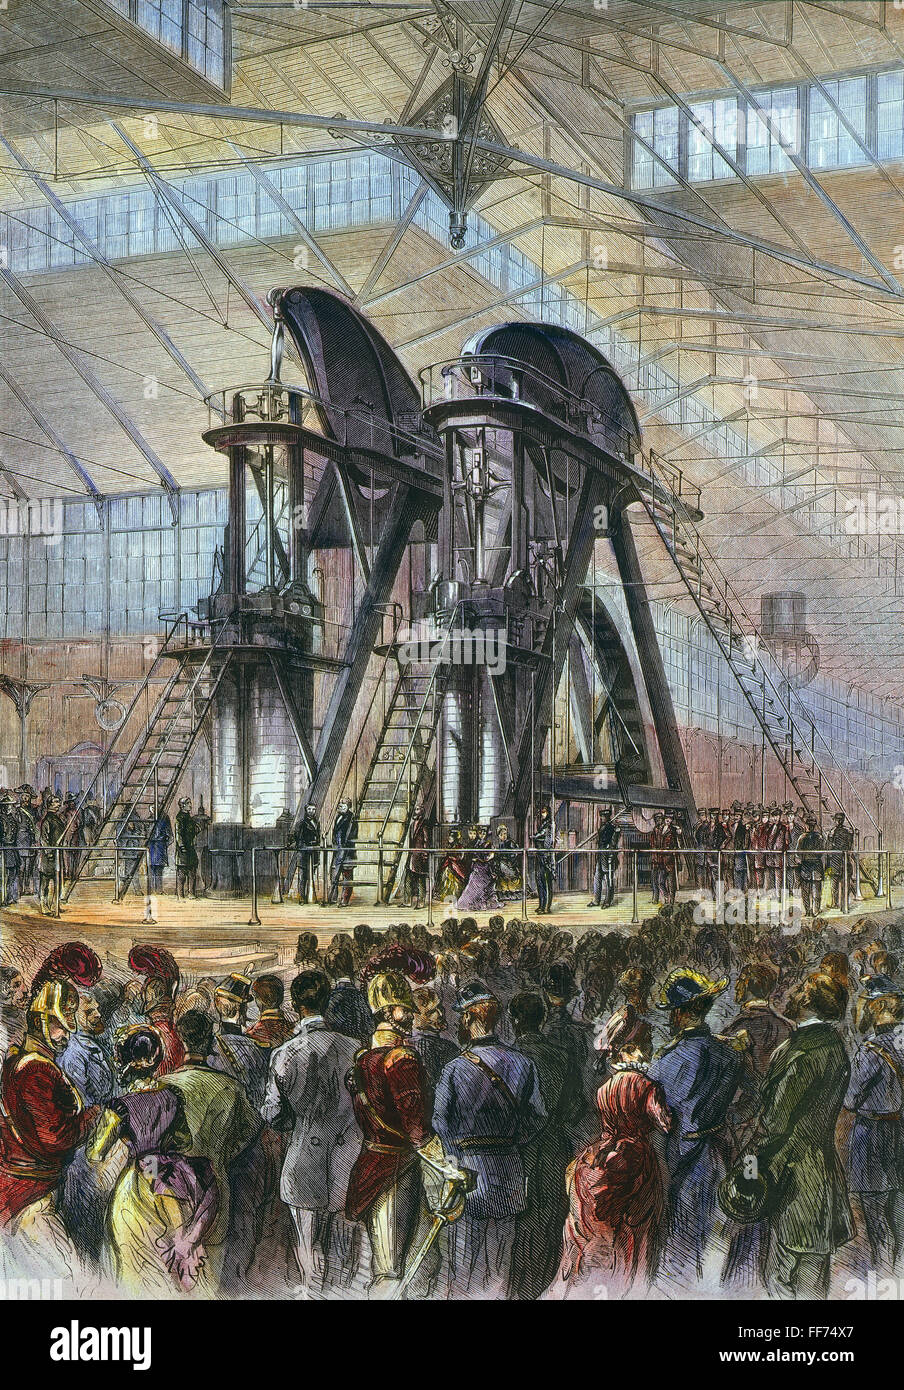 GRANT & BRAZILIAN EMPEROR. /nPresident Ulysses S. Grant and Brazilian Emperor Dom Pedro II starting the Corliss Engine at the opening ceremonies of the Philadelphia Centennial Fair in 1876: contemporary wood engraving. Stock Photo